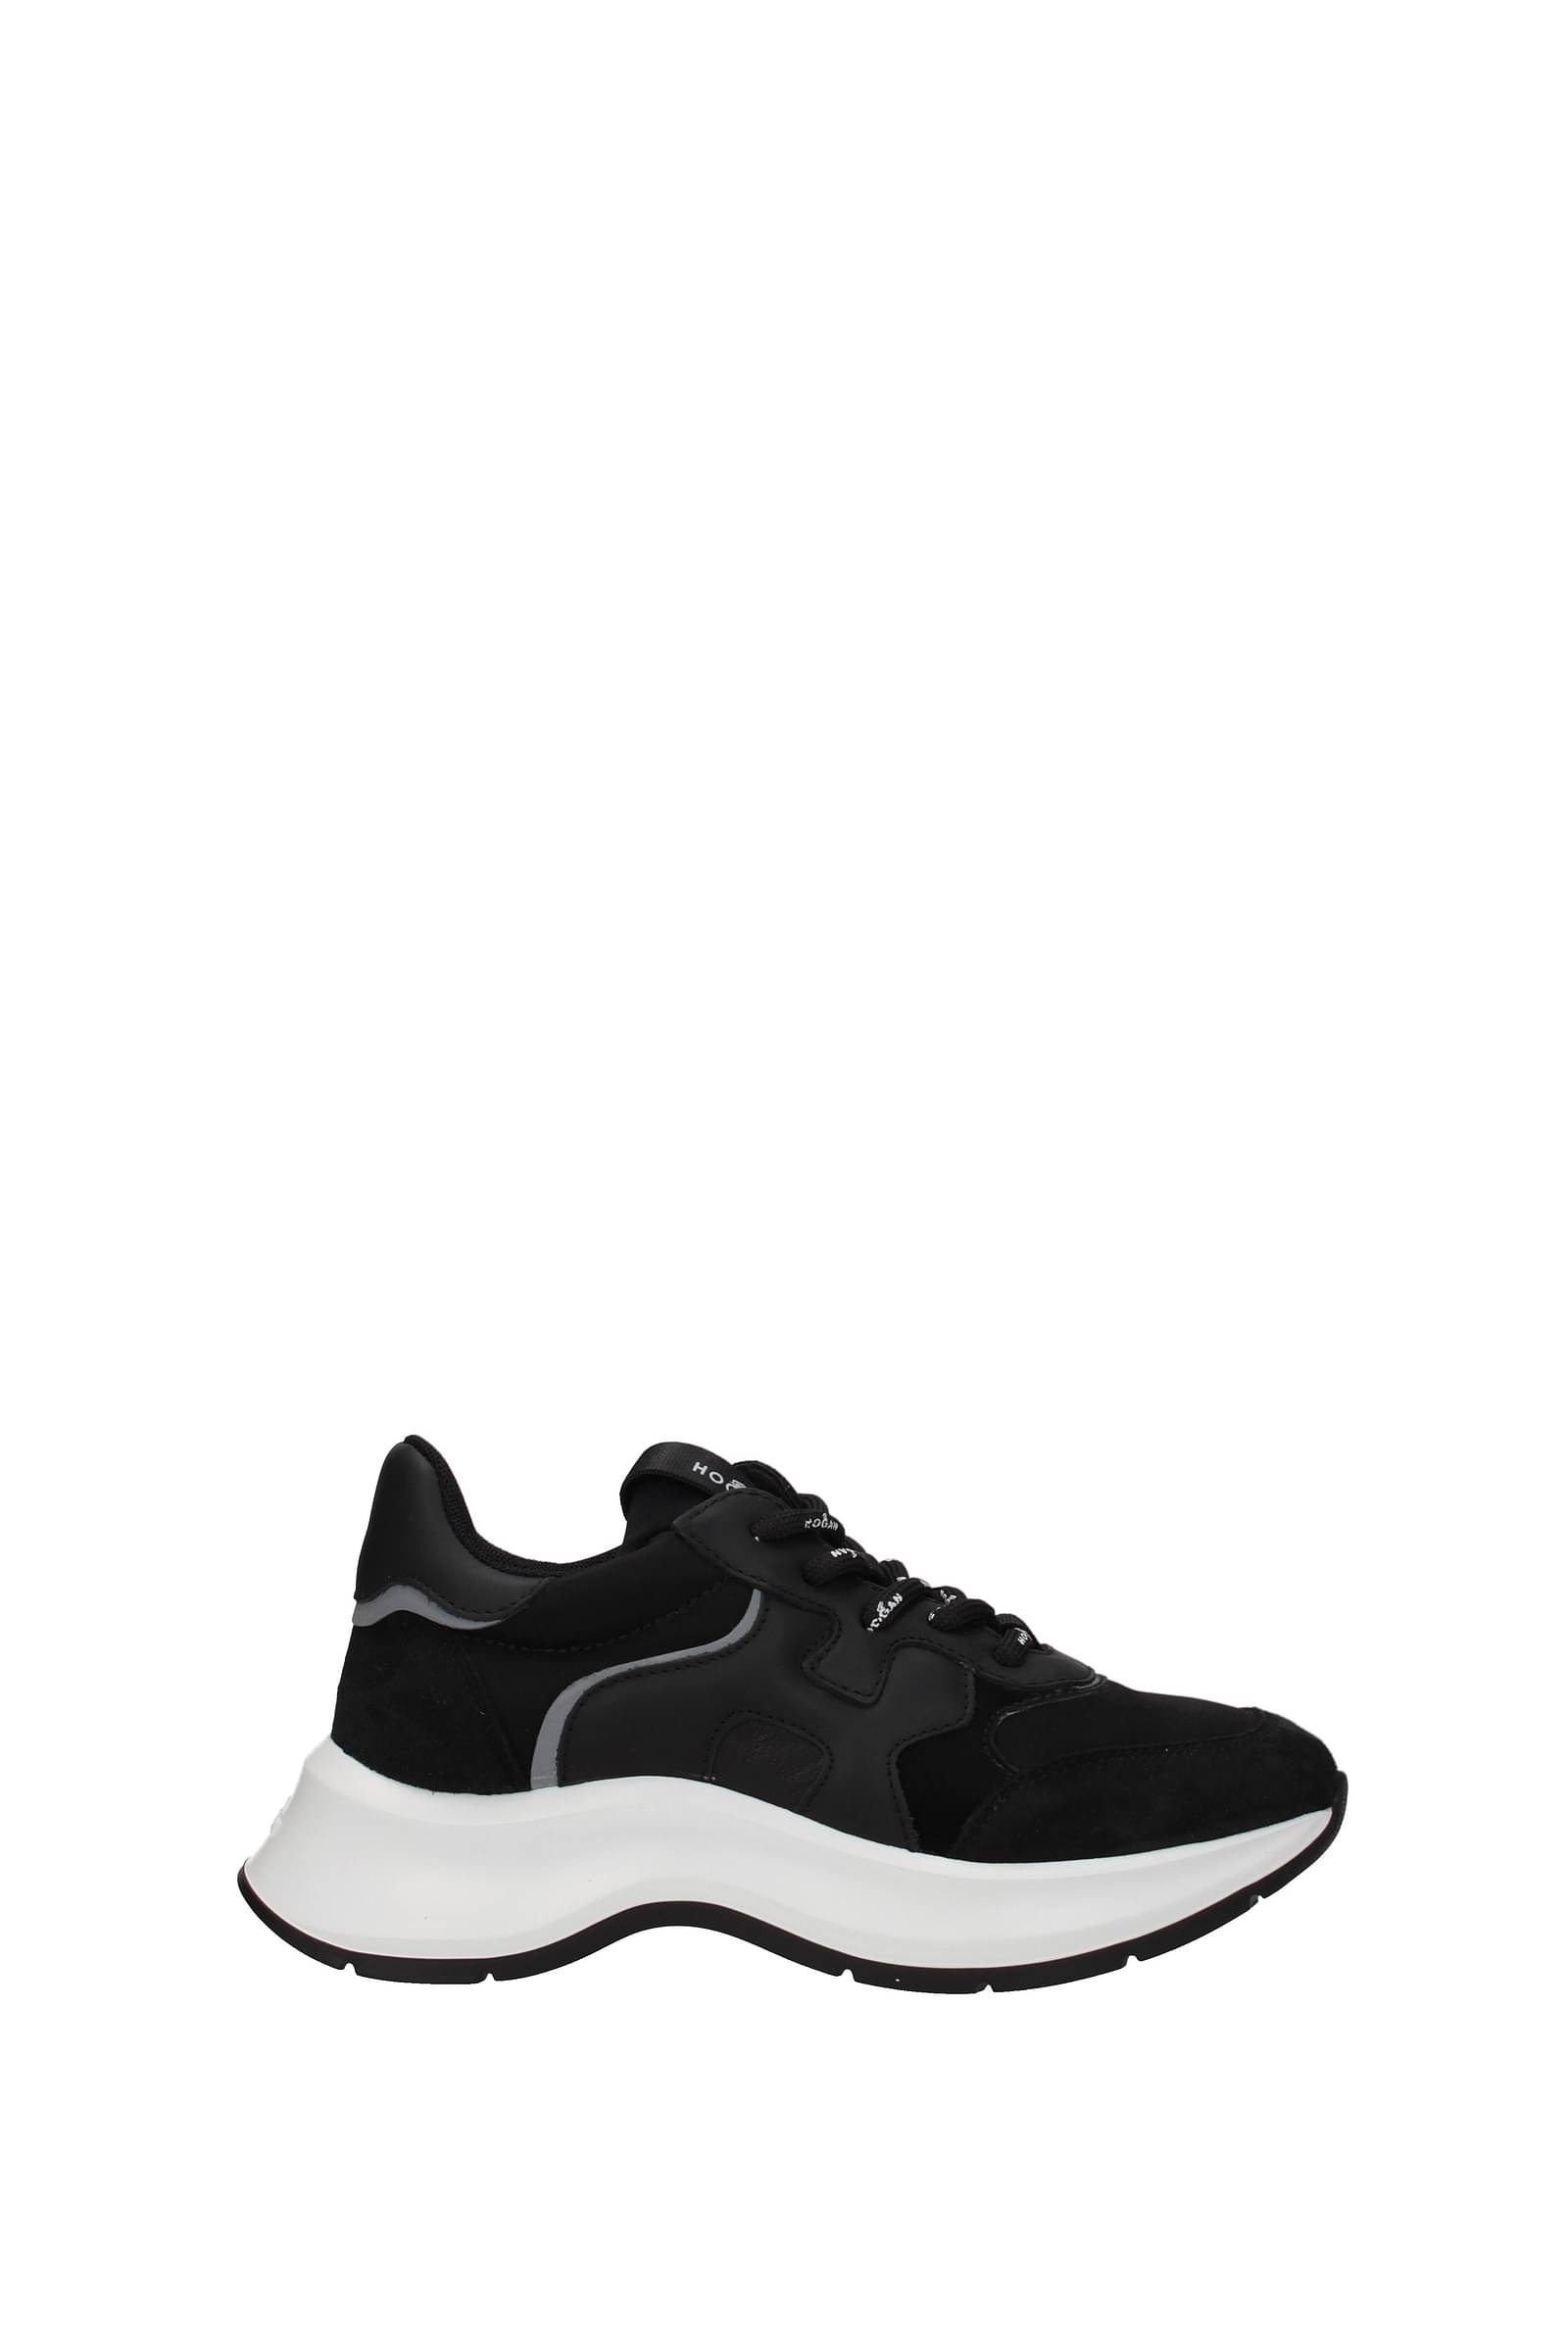 Buy Akk Ladies Sports Shoes Walking Shoes for Women Casual Lace Up  Breathable Tennis Running Sneakers Black Size 8 at Amazon.in